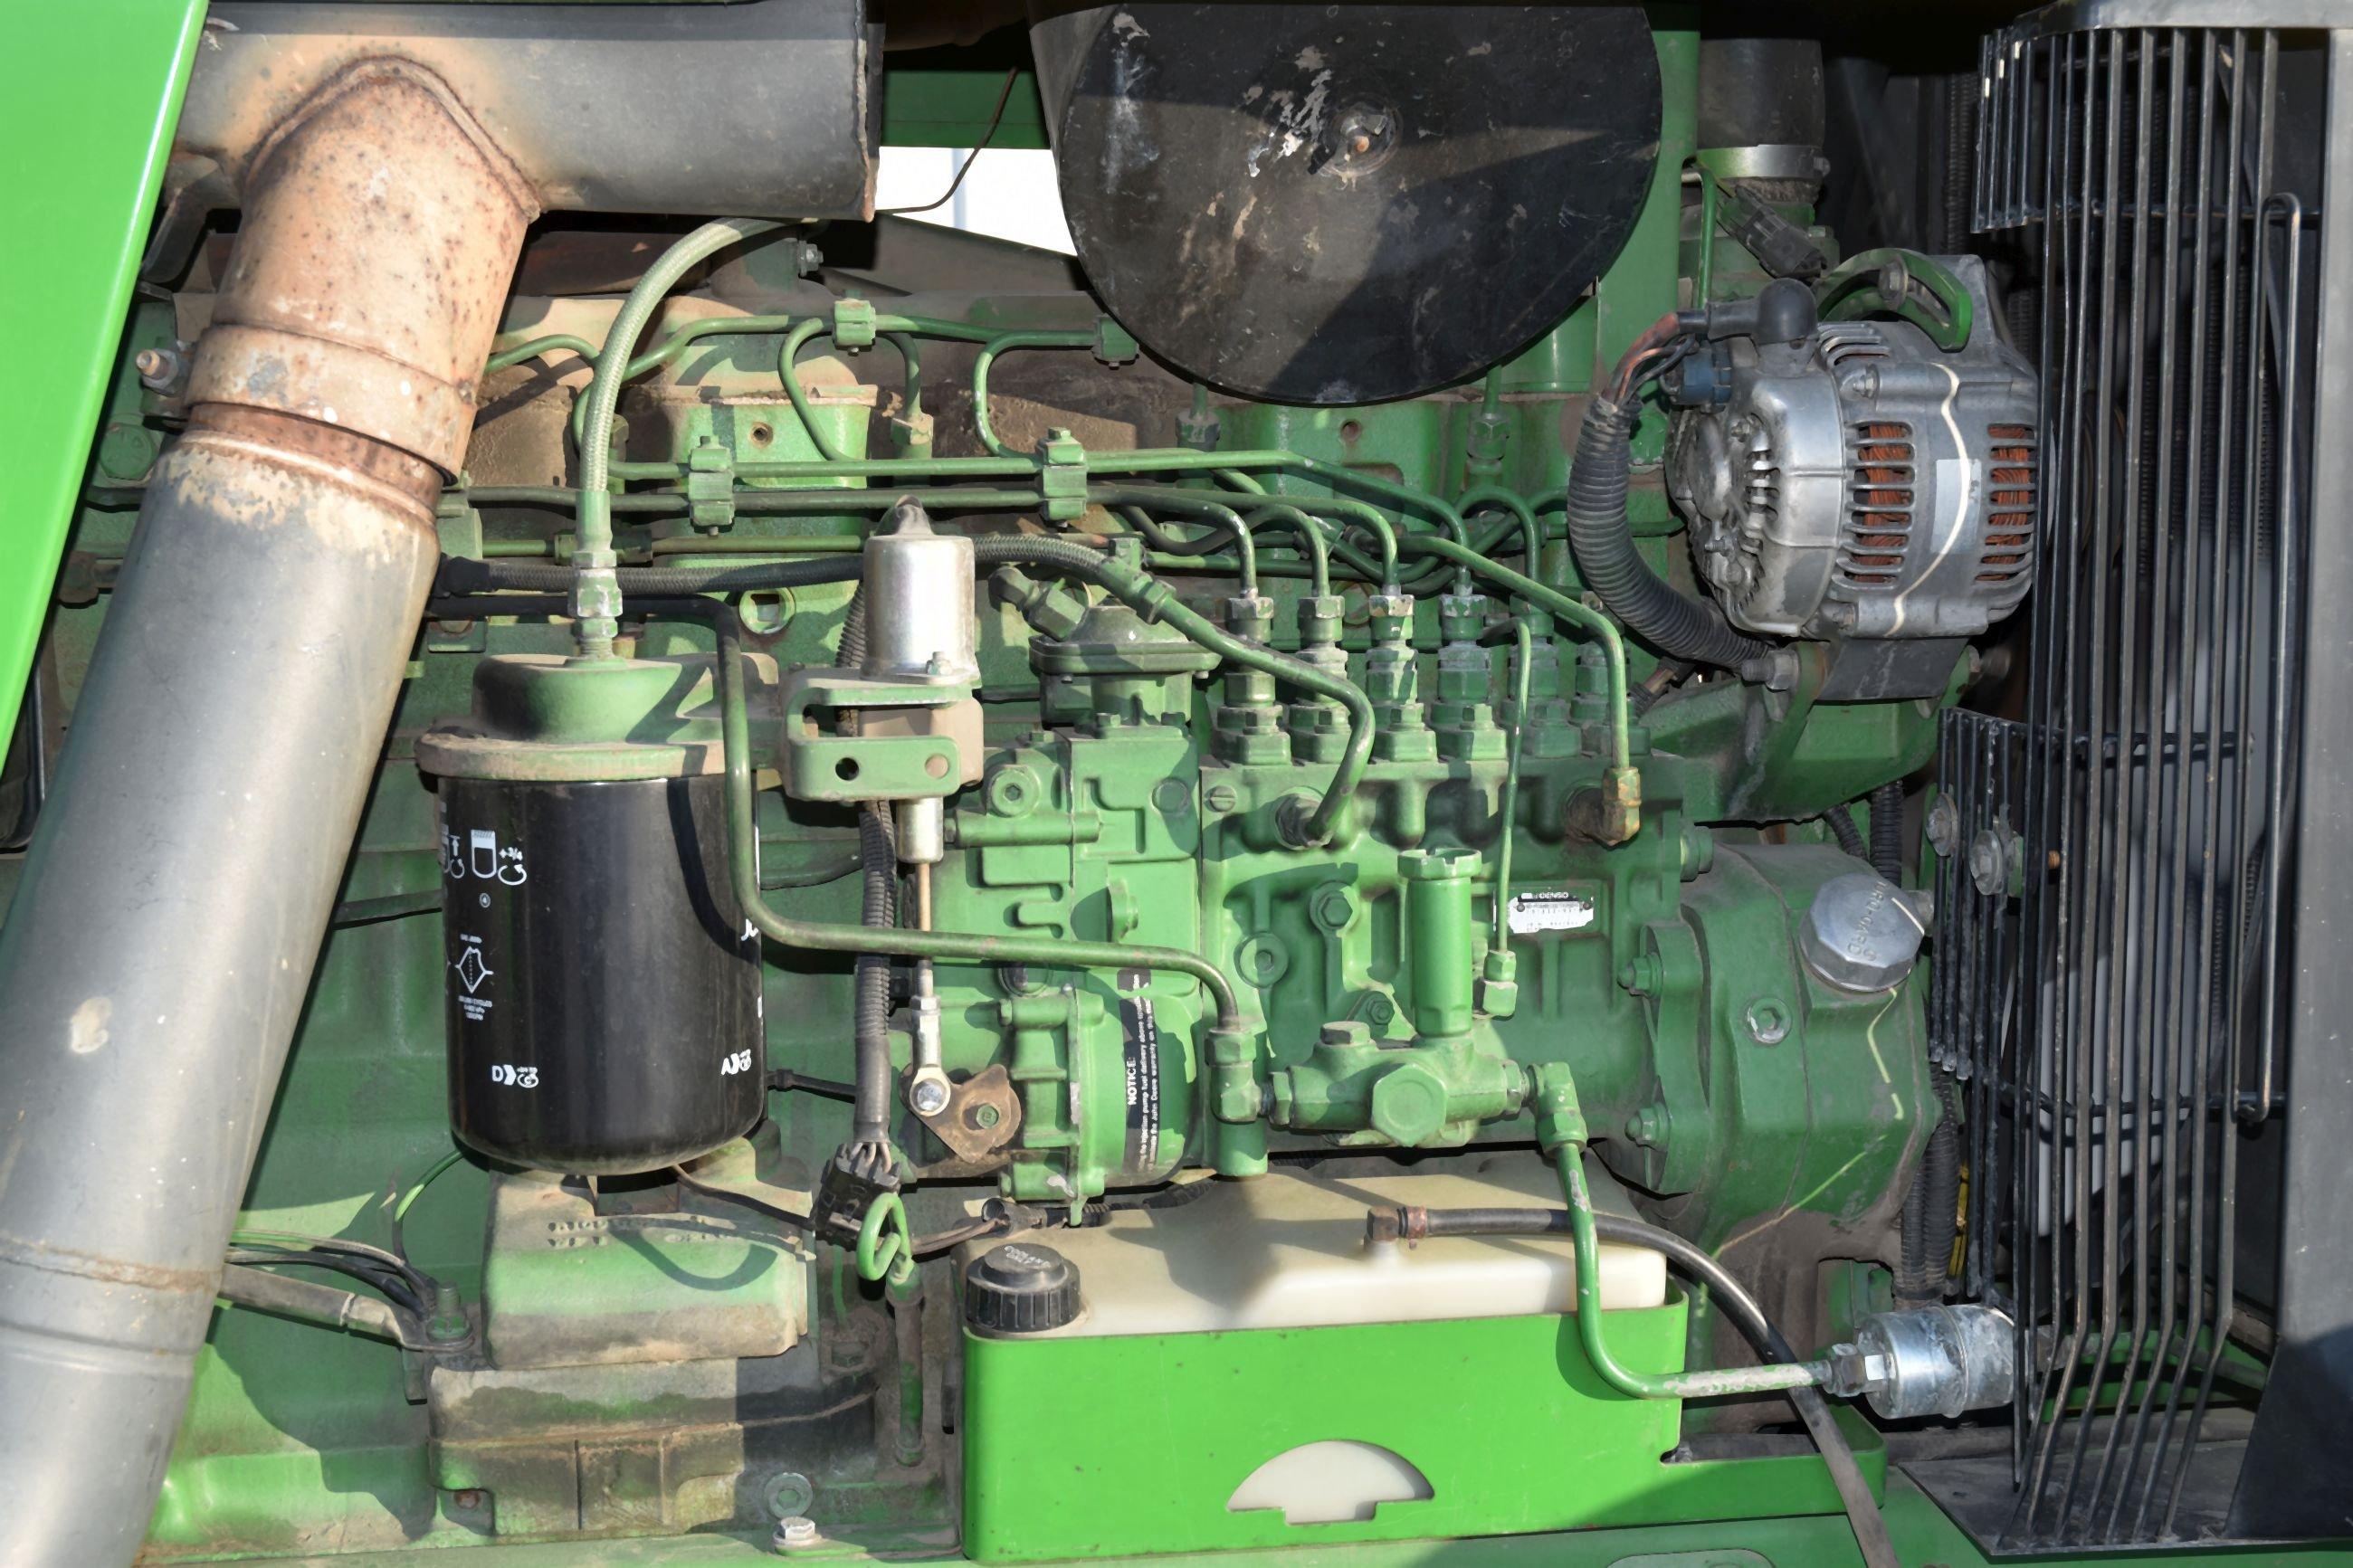 1993 John Deere 4960 MFWD, 7373 Hours, Engine Overhauled At 6,299 Hours With Paperwork Spent